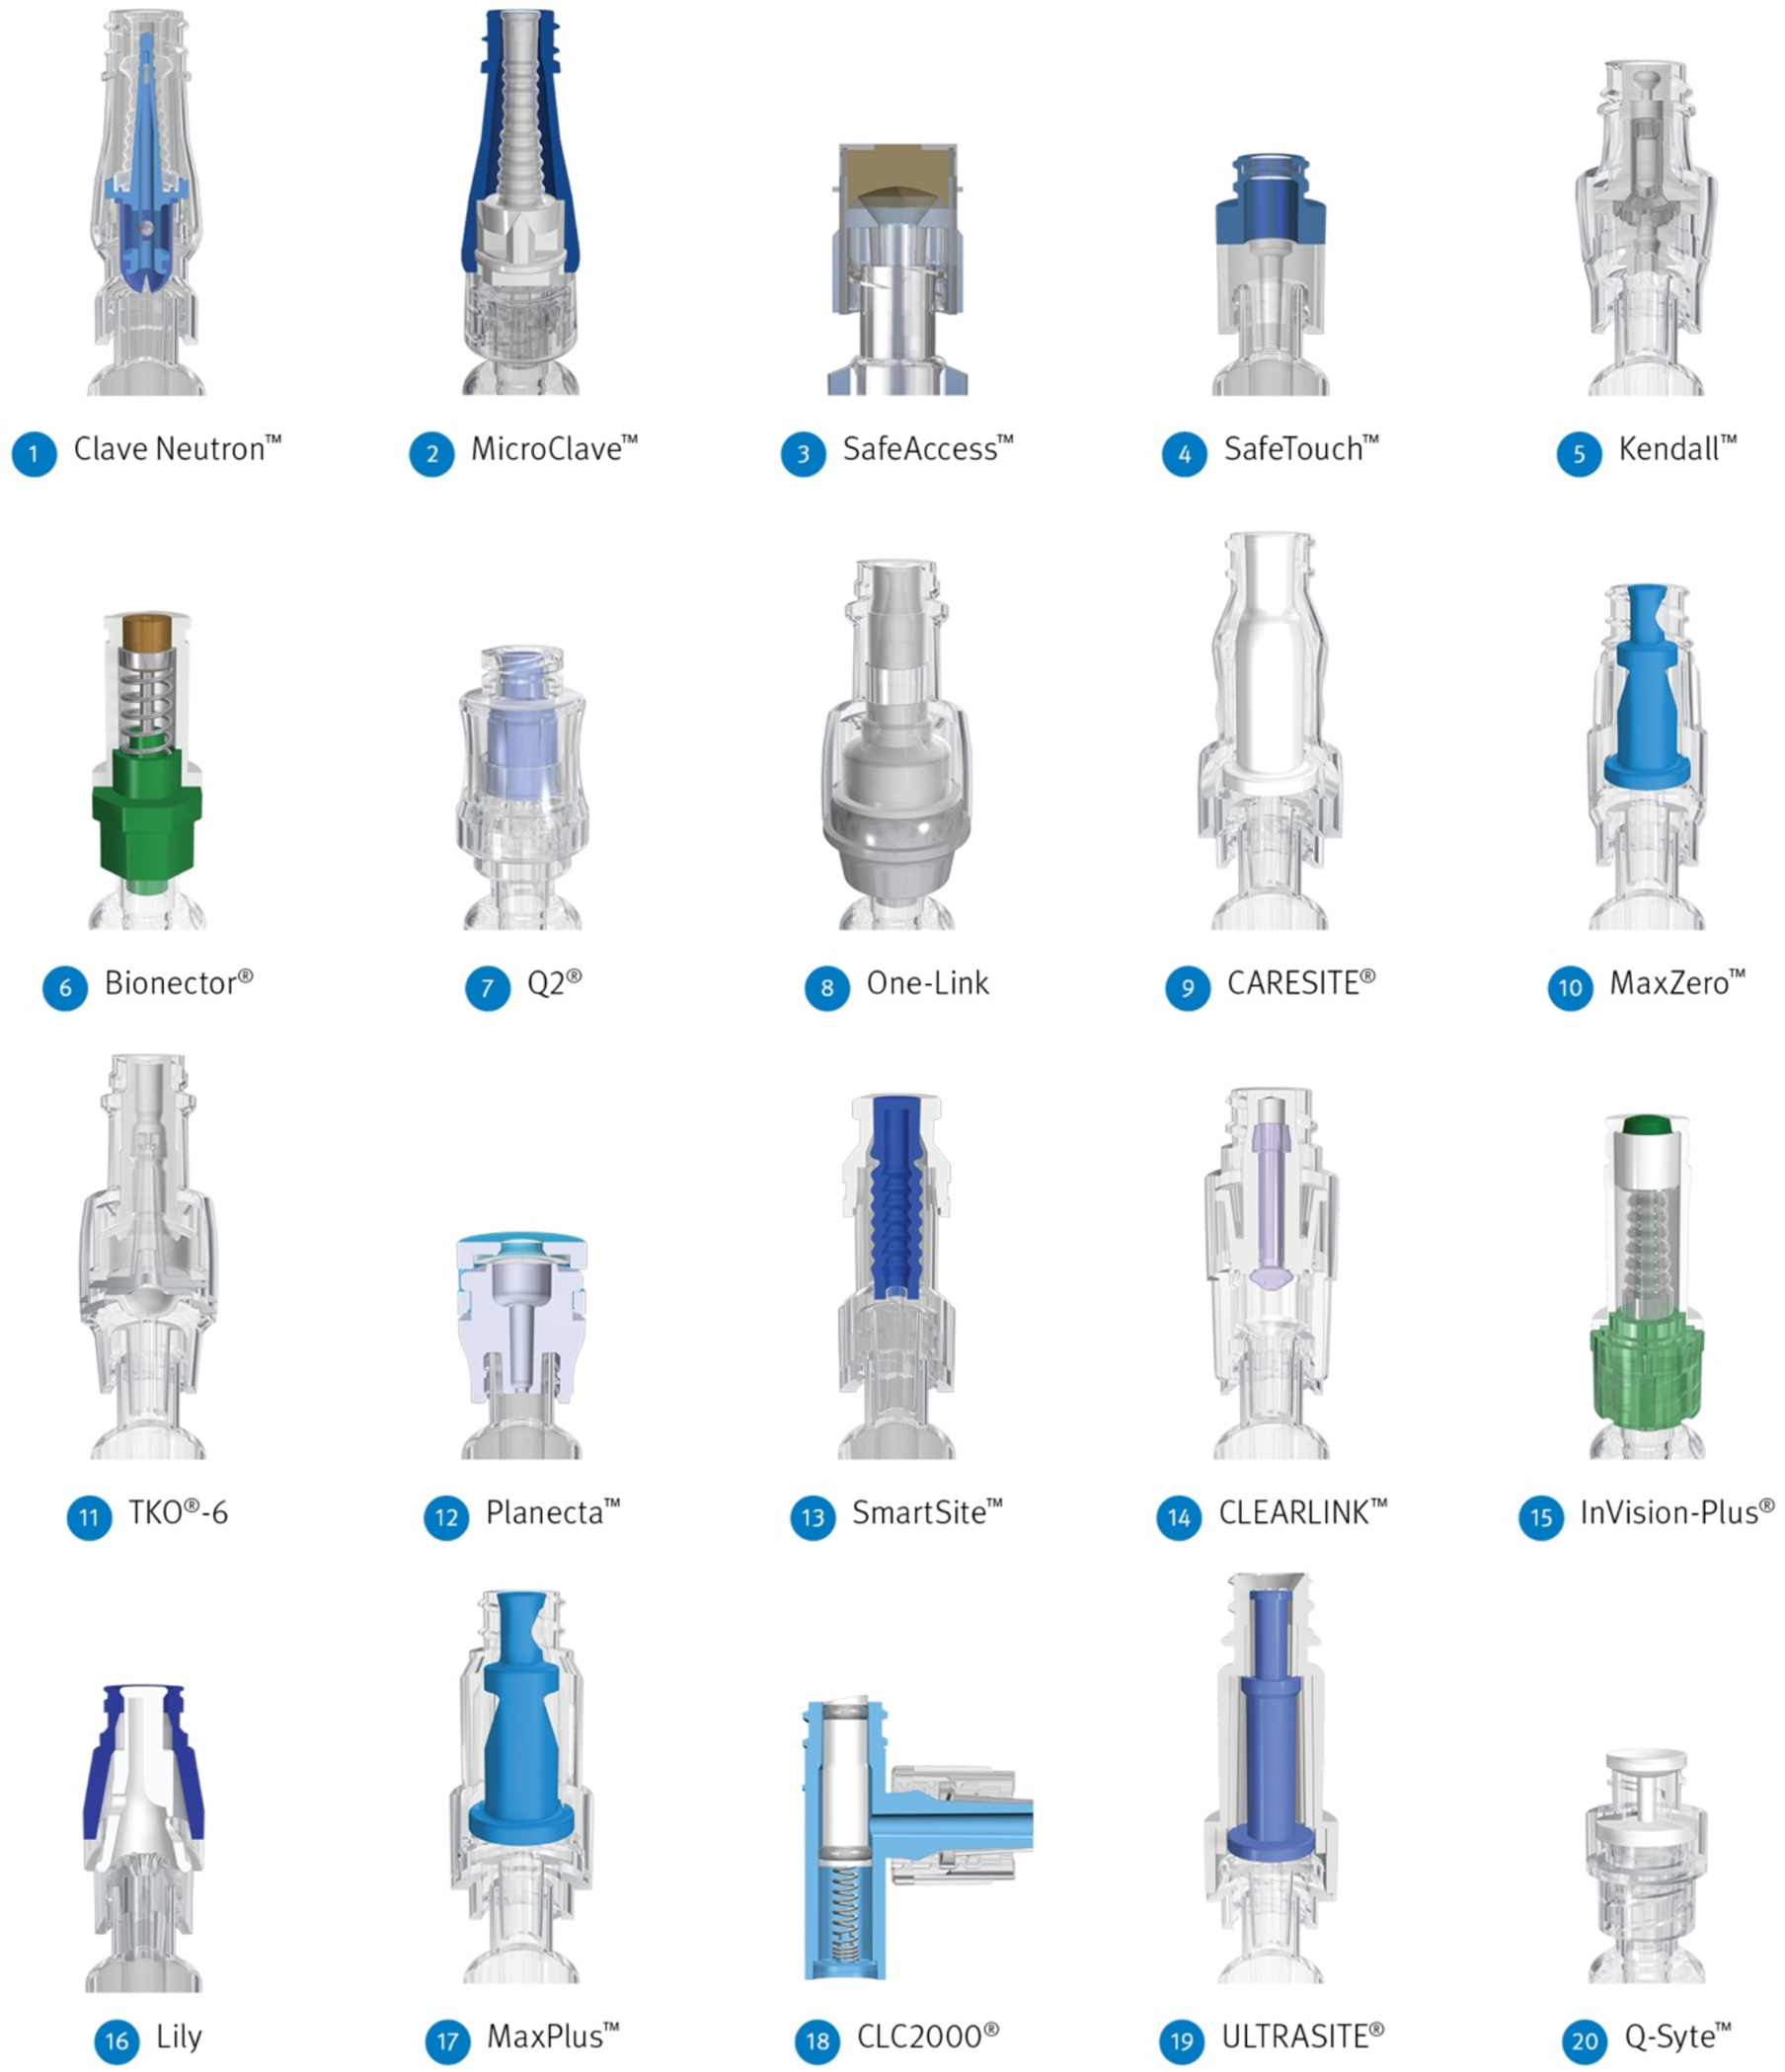 CARESITE® Luer Access Device - A Closed Needleless Connector 